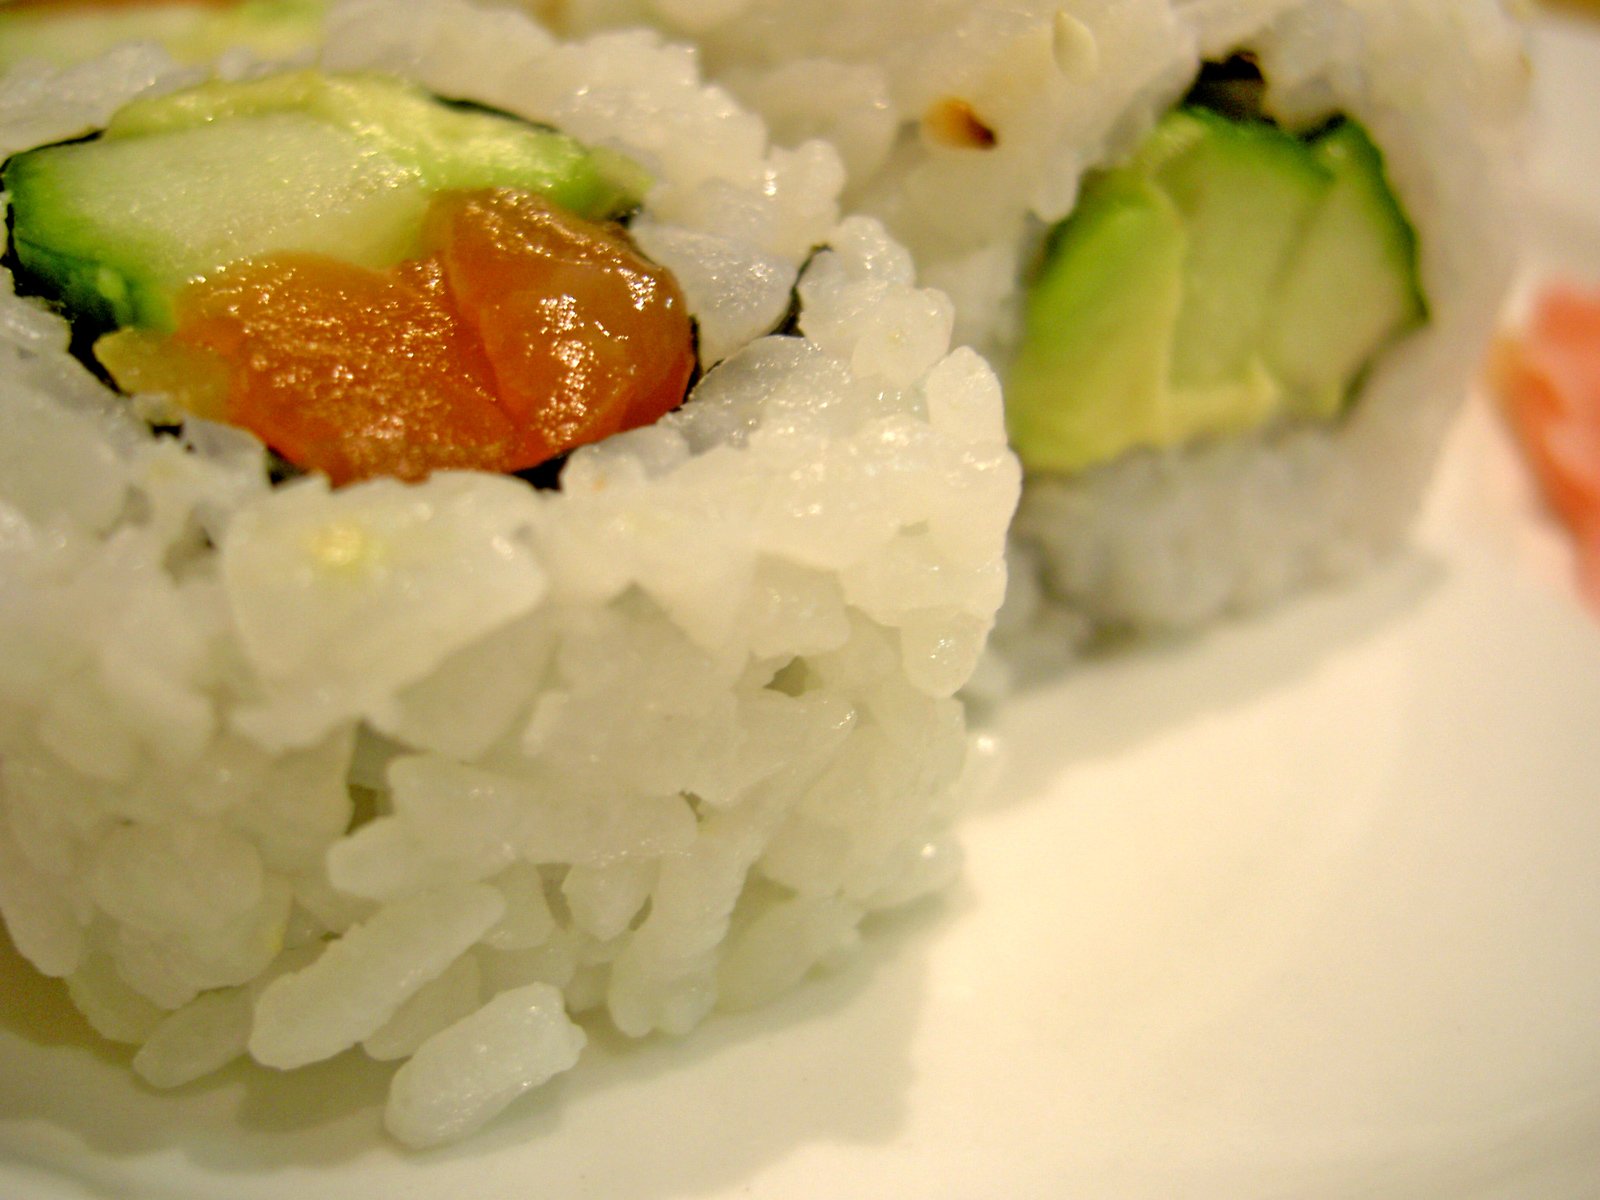 a meal that includes sushi with several toppings